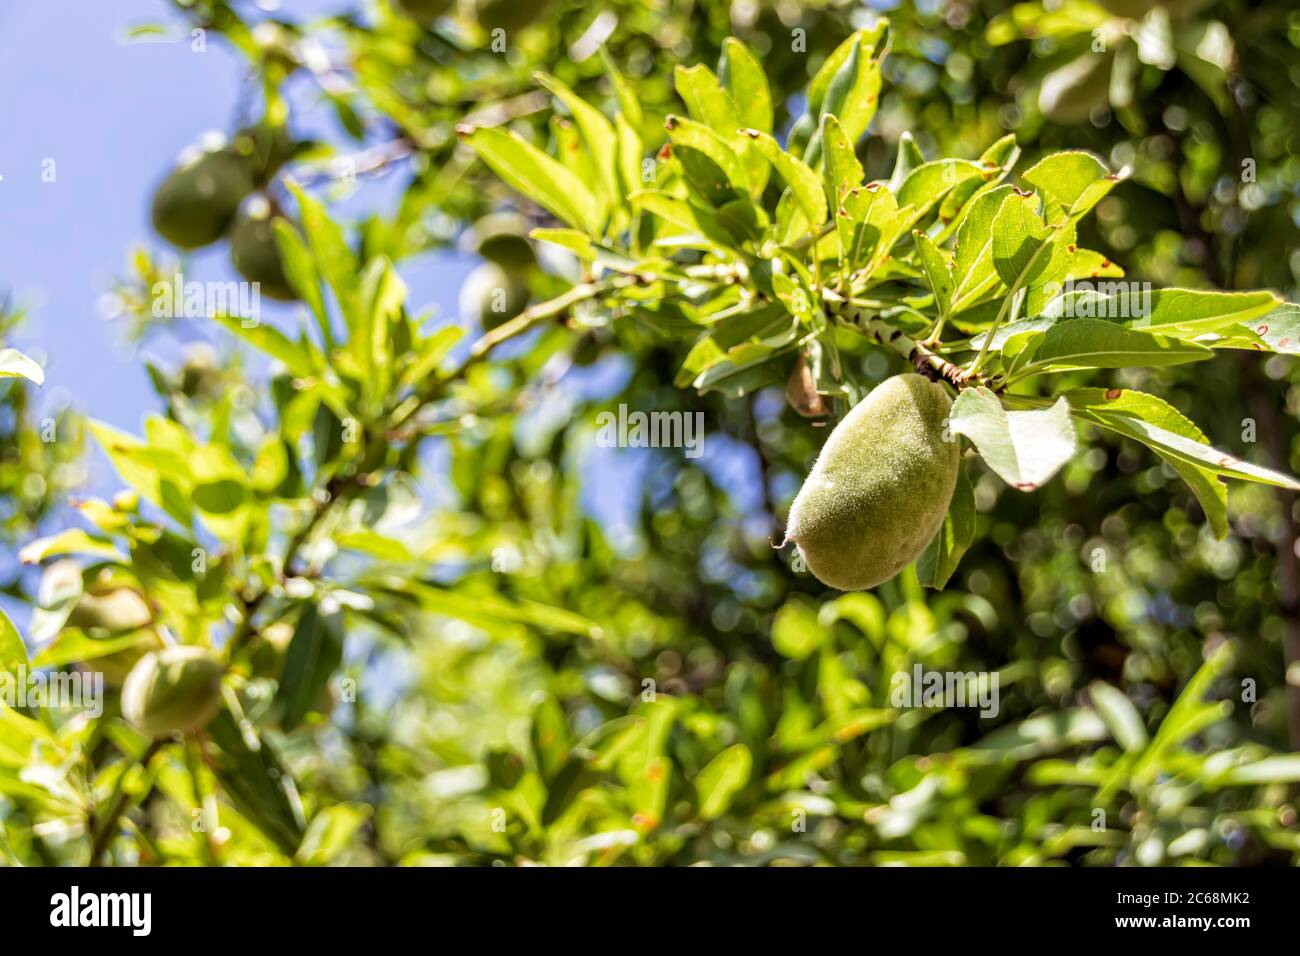 Almond tree branches with unripe fruits on a background of blue sky close-up Stock Photo